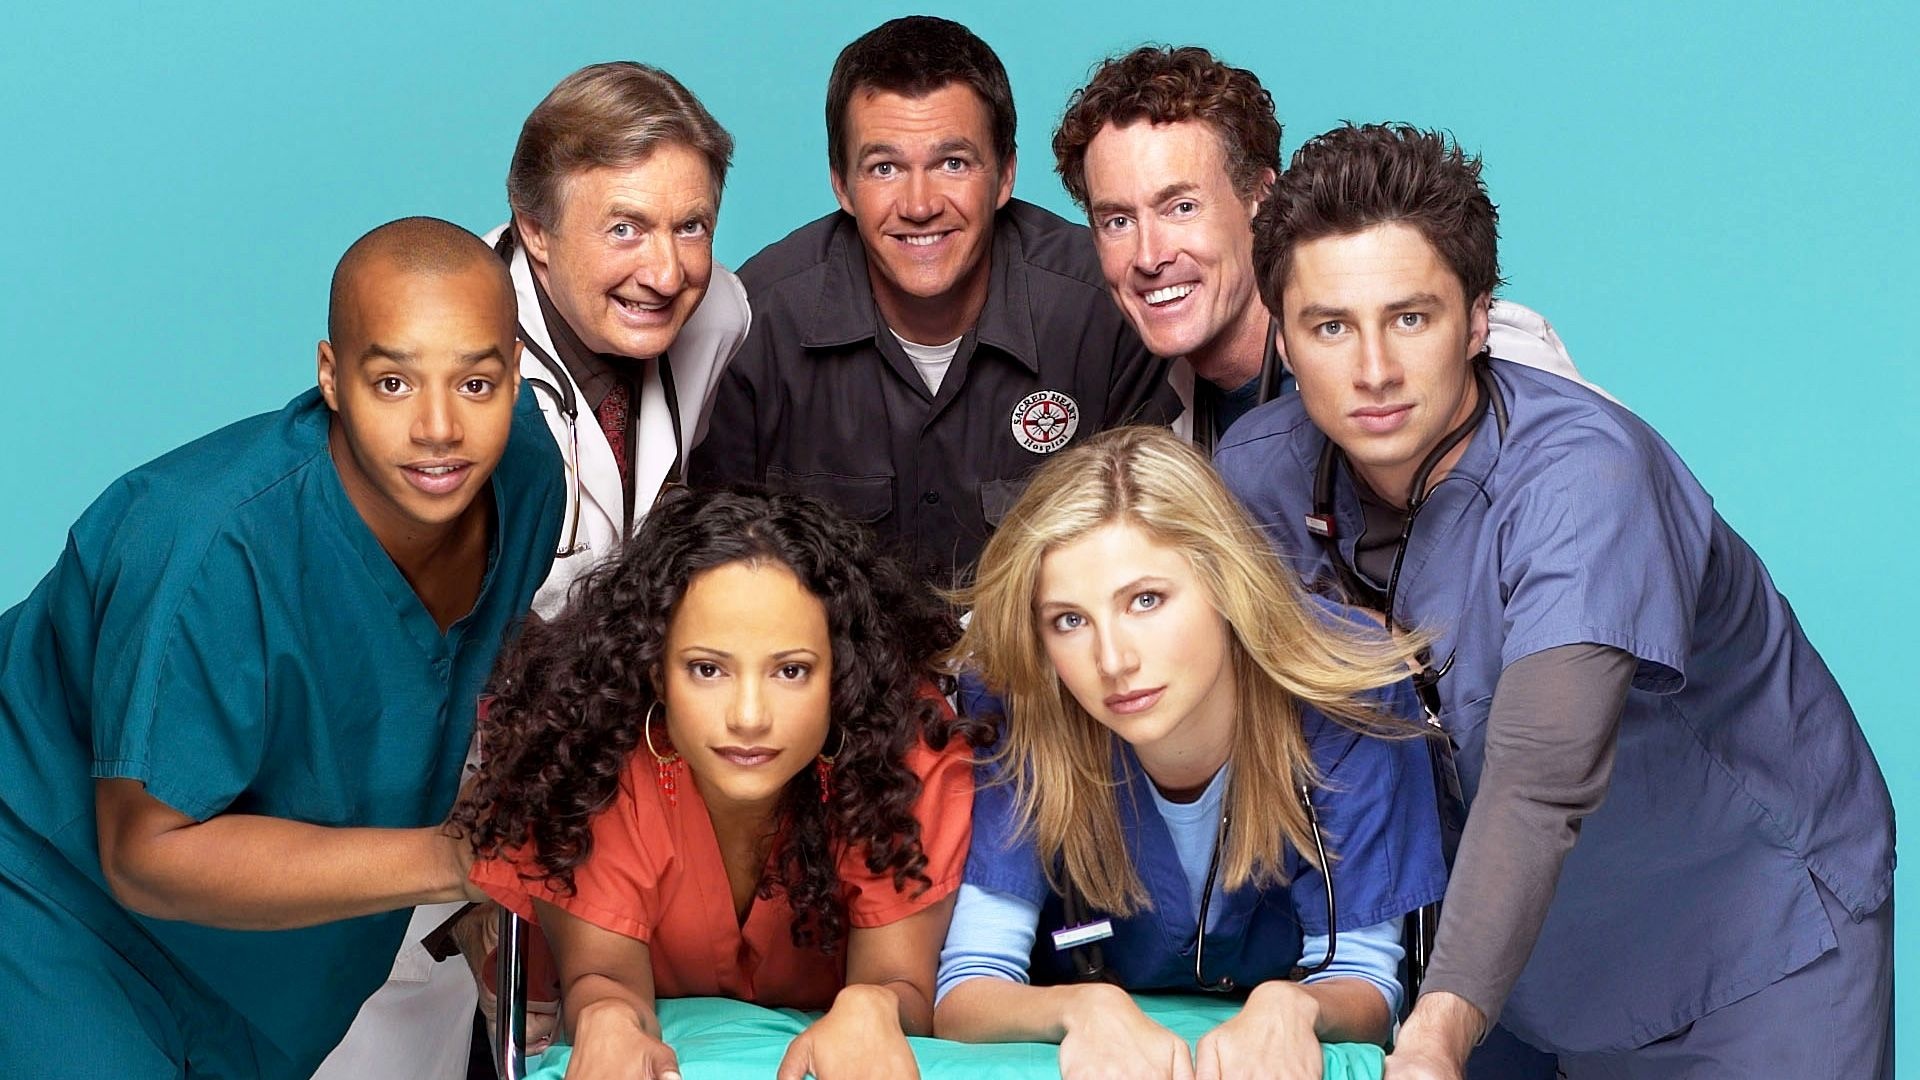 Zach Braff: Scrubs, John Dorian, Created by Bill Lawrence and produced by Doozer and ABC Studios. 1920x1080 Full HD Wallpaper.